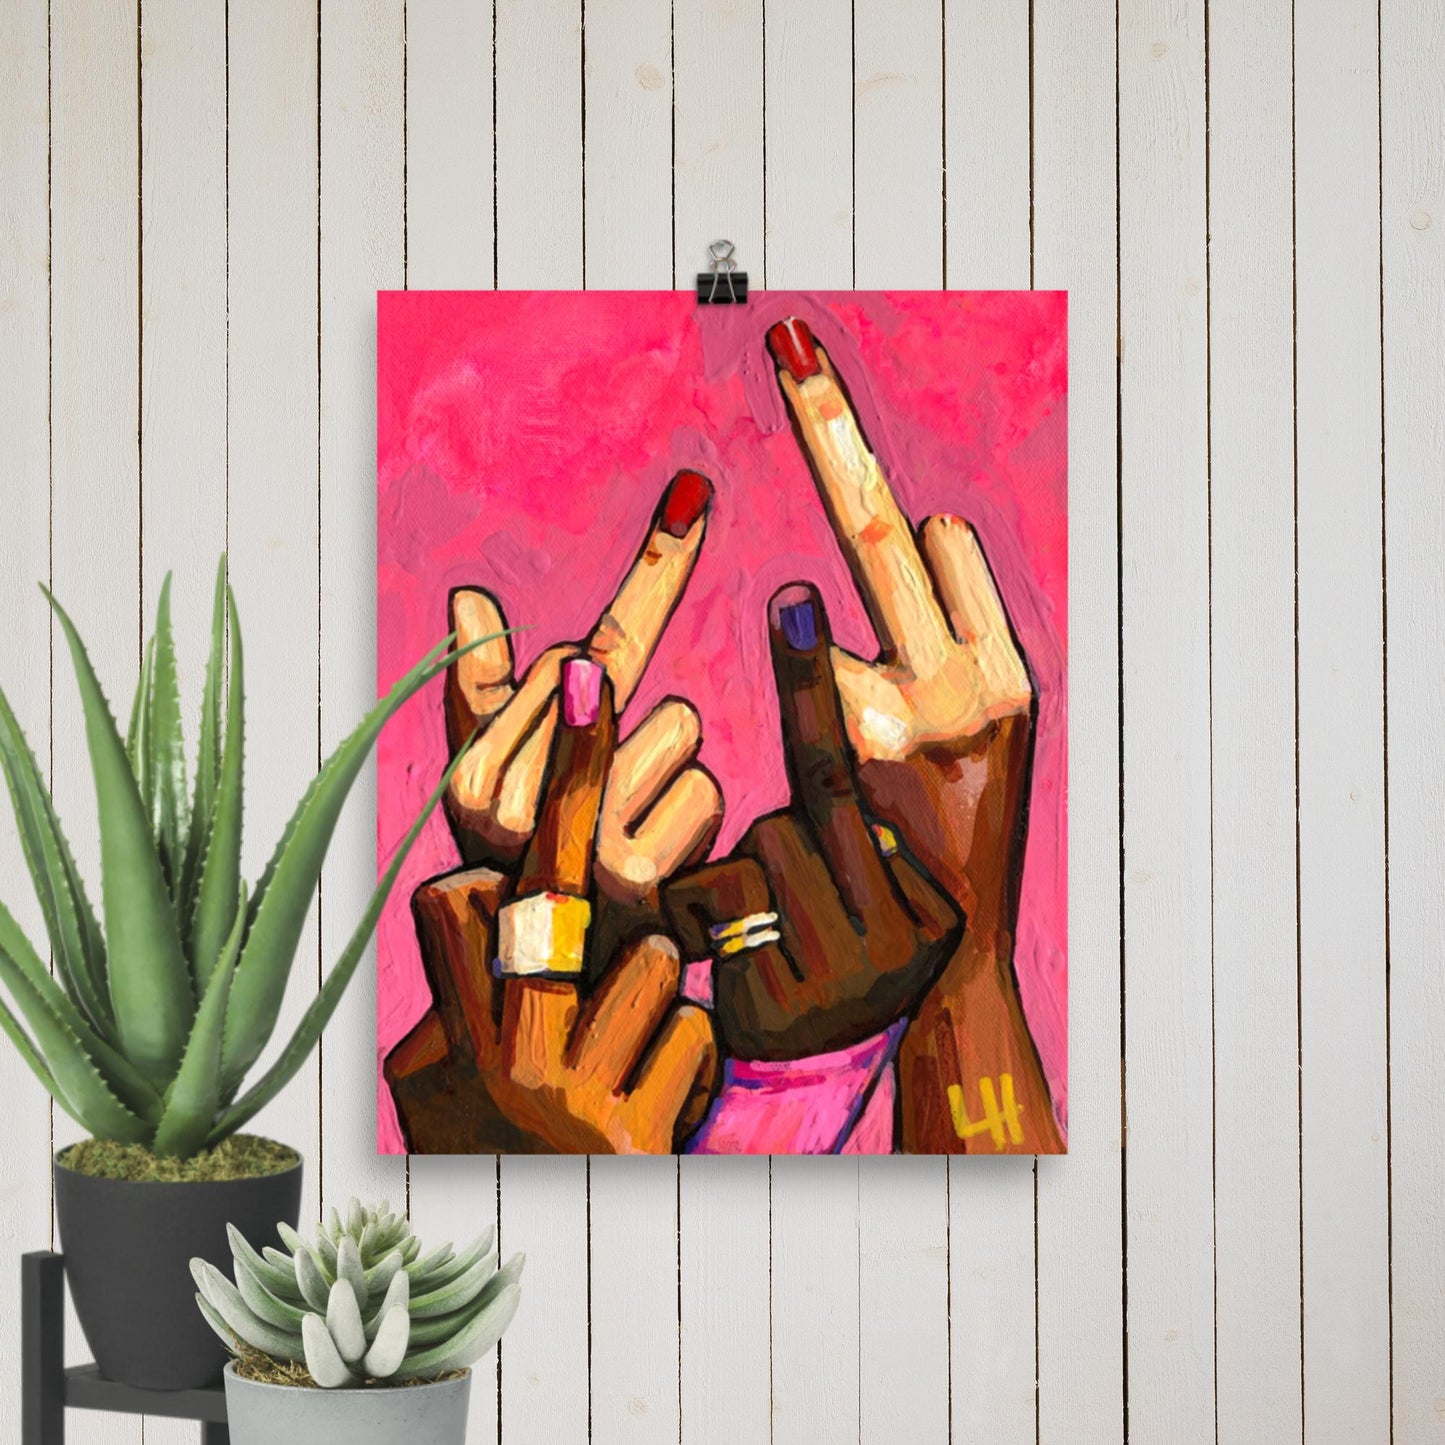 8 x 10 'Middle Fingers Up' Print